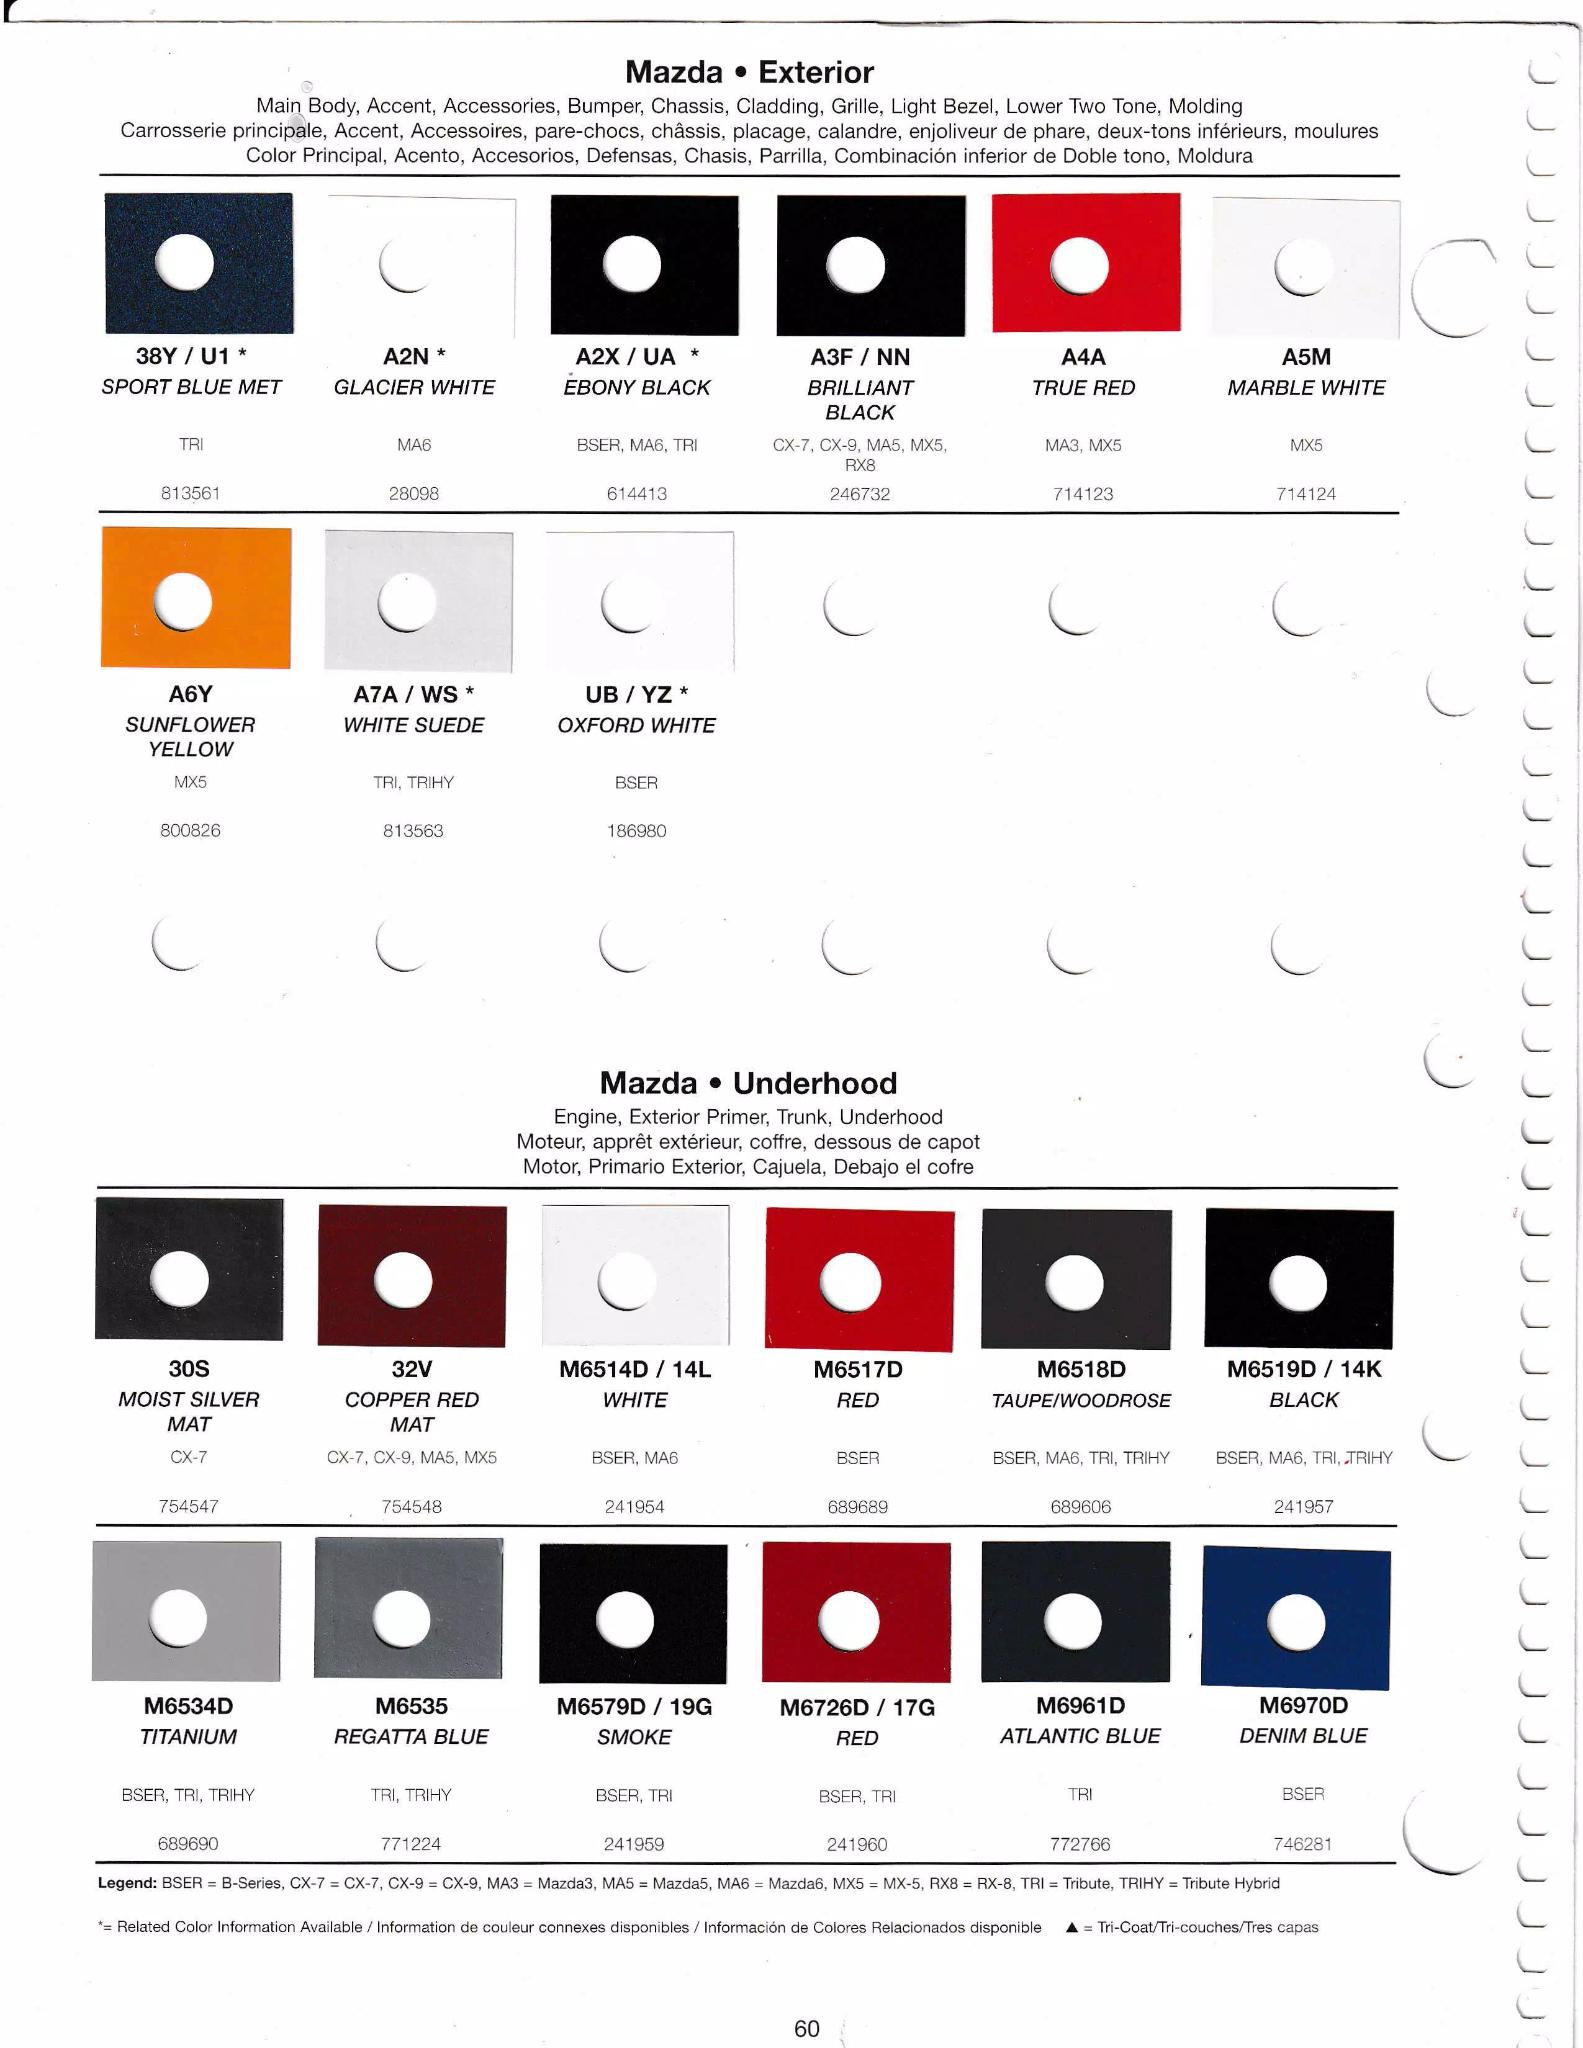 oem paint chips, paint codes, color names, and basf mixing stock numebrs for 2009 model Mazda automobiles.